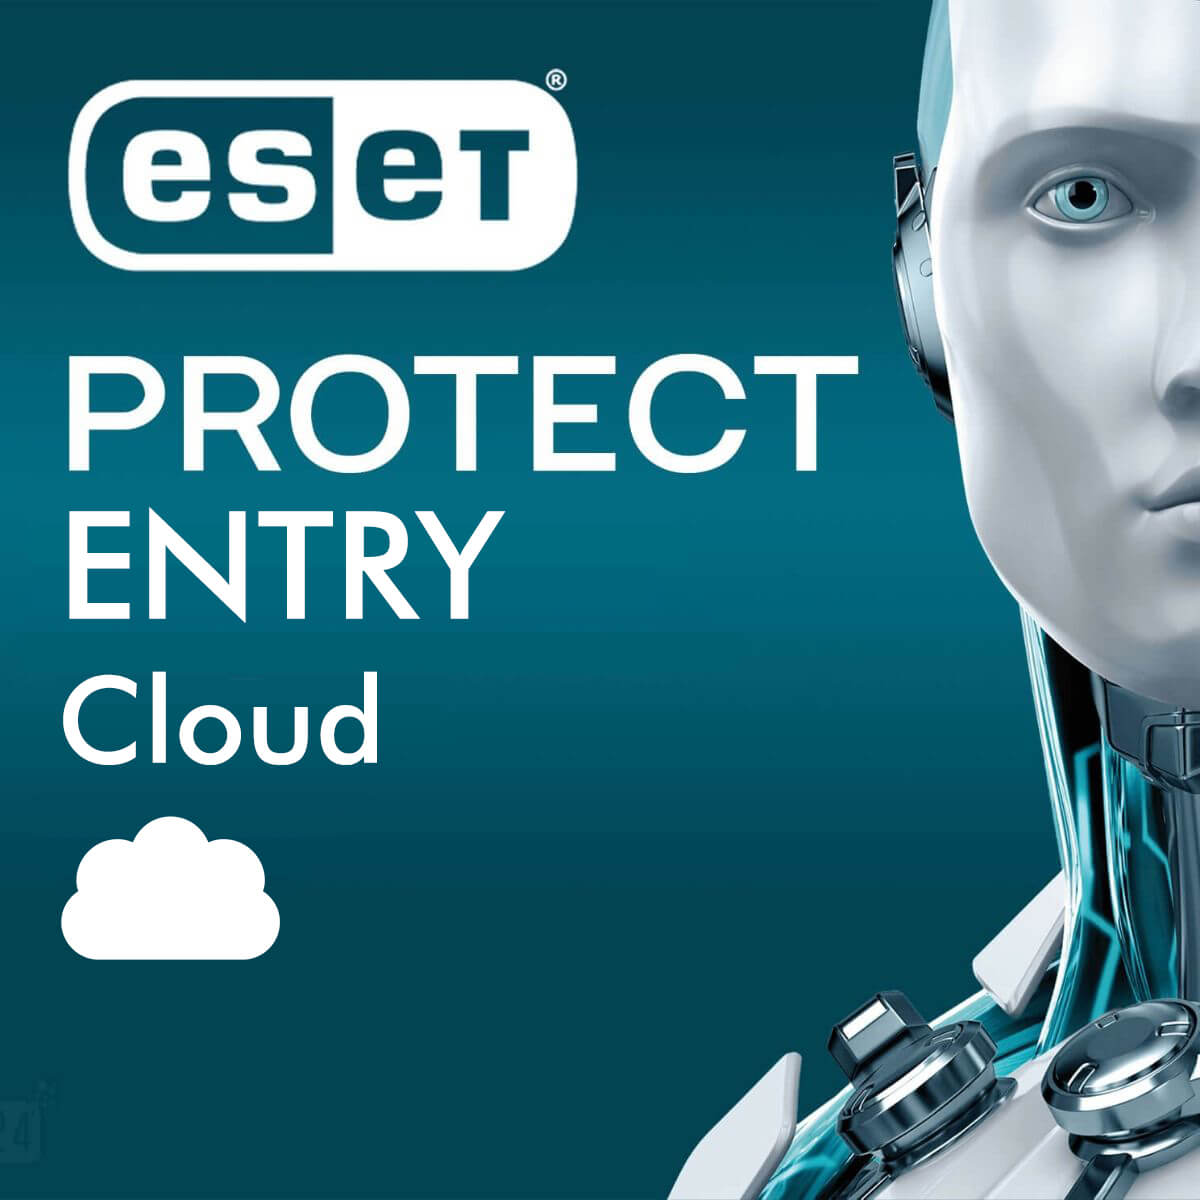 ESET Protect Entry Cloud (Academic/ Non-Profit/ Gov) 1-Year Subscription License